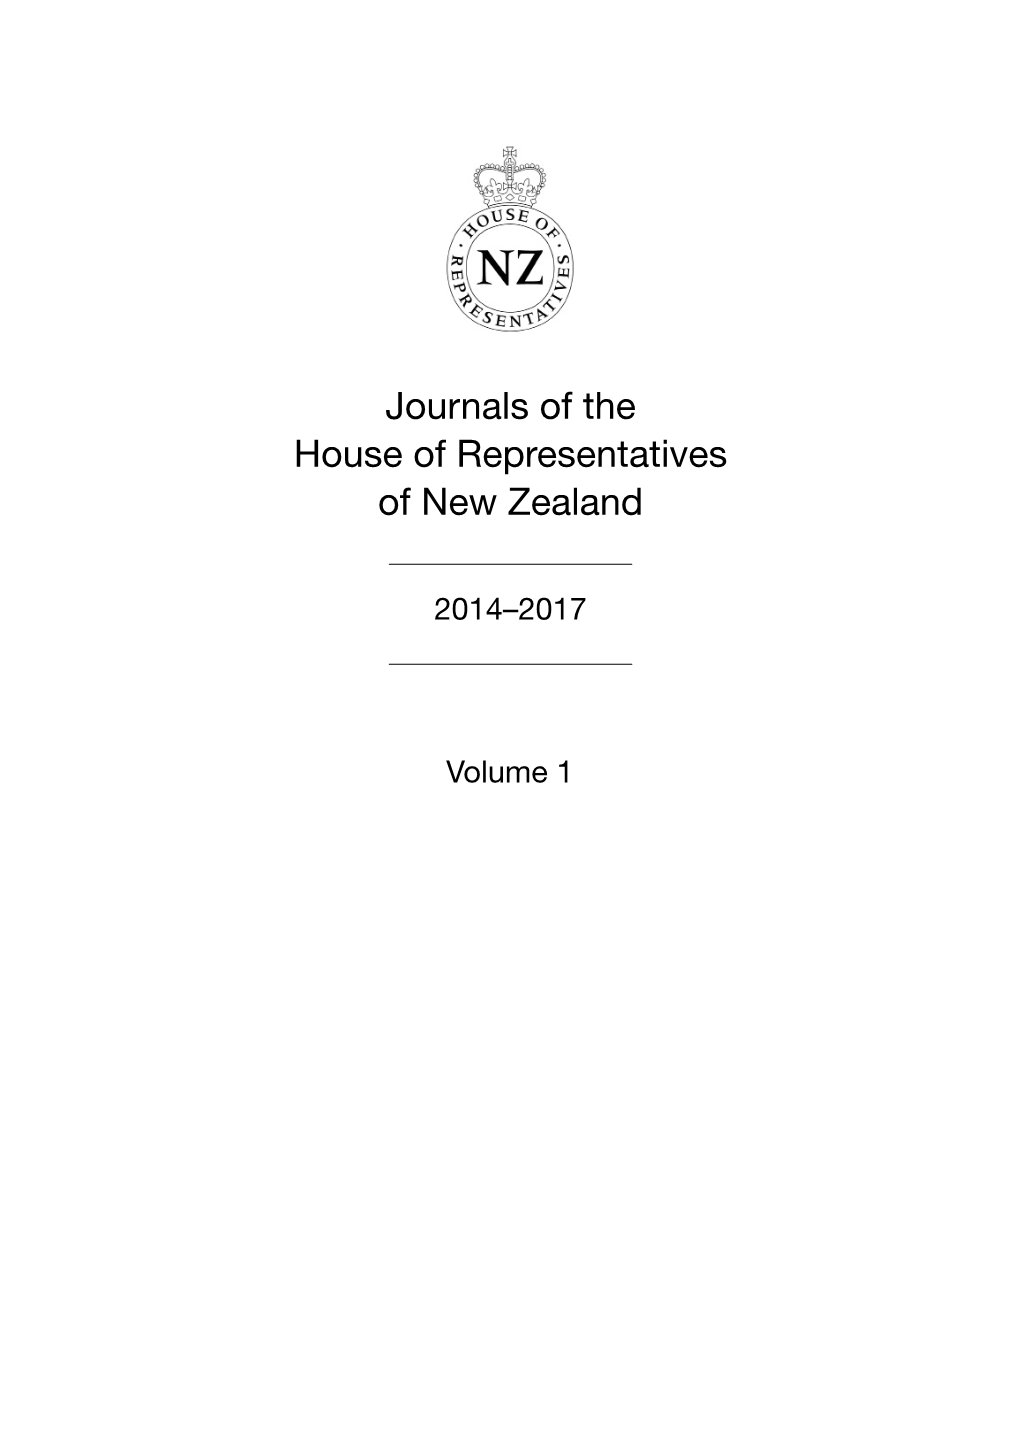 Journals of the House 51St Parliament – VOL 1